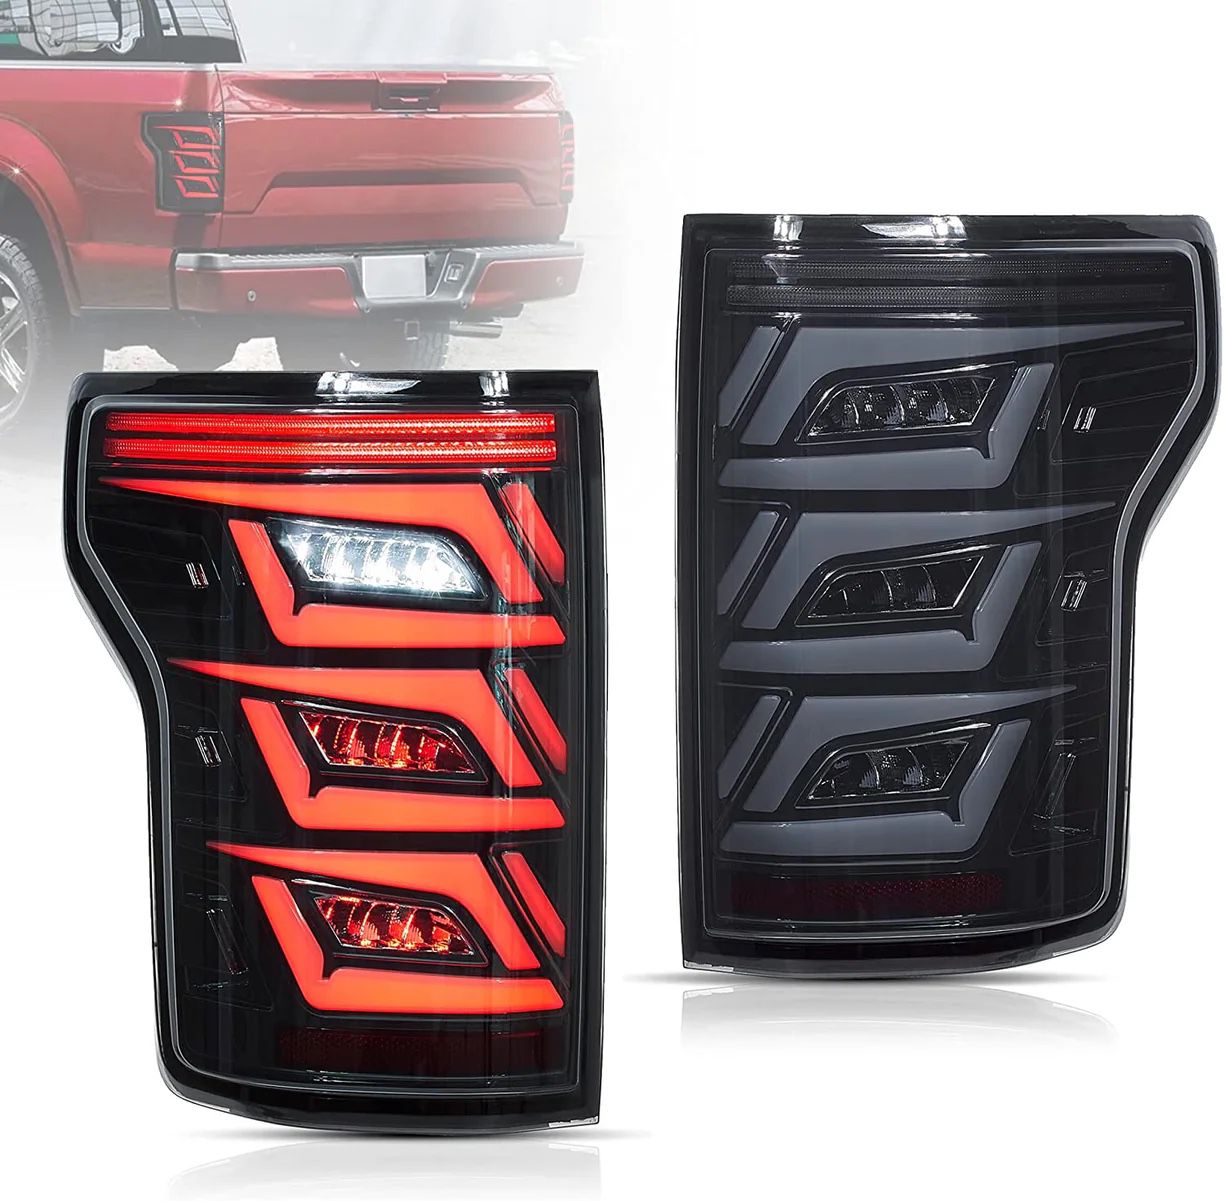 LED Smoked Tail Lights Assembly For Ford F150 2015-2020 Fits With Factory Halogen Rear Lamps Models